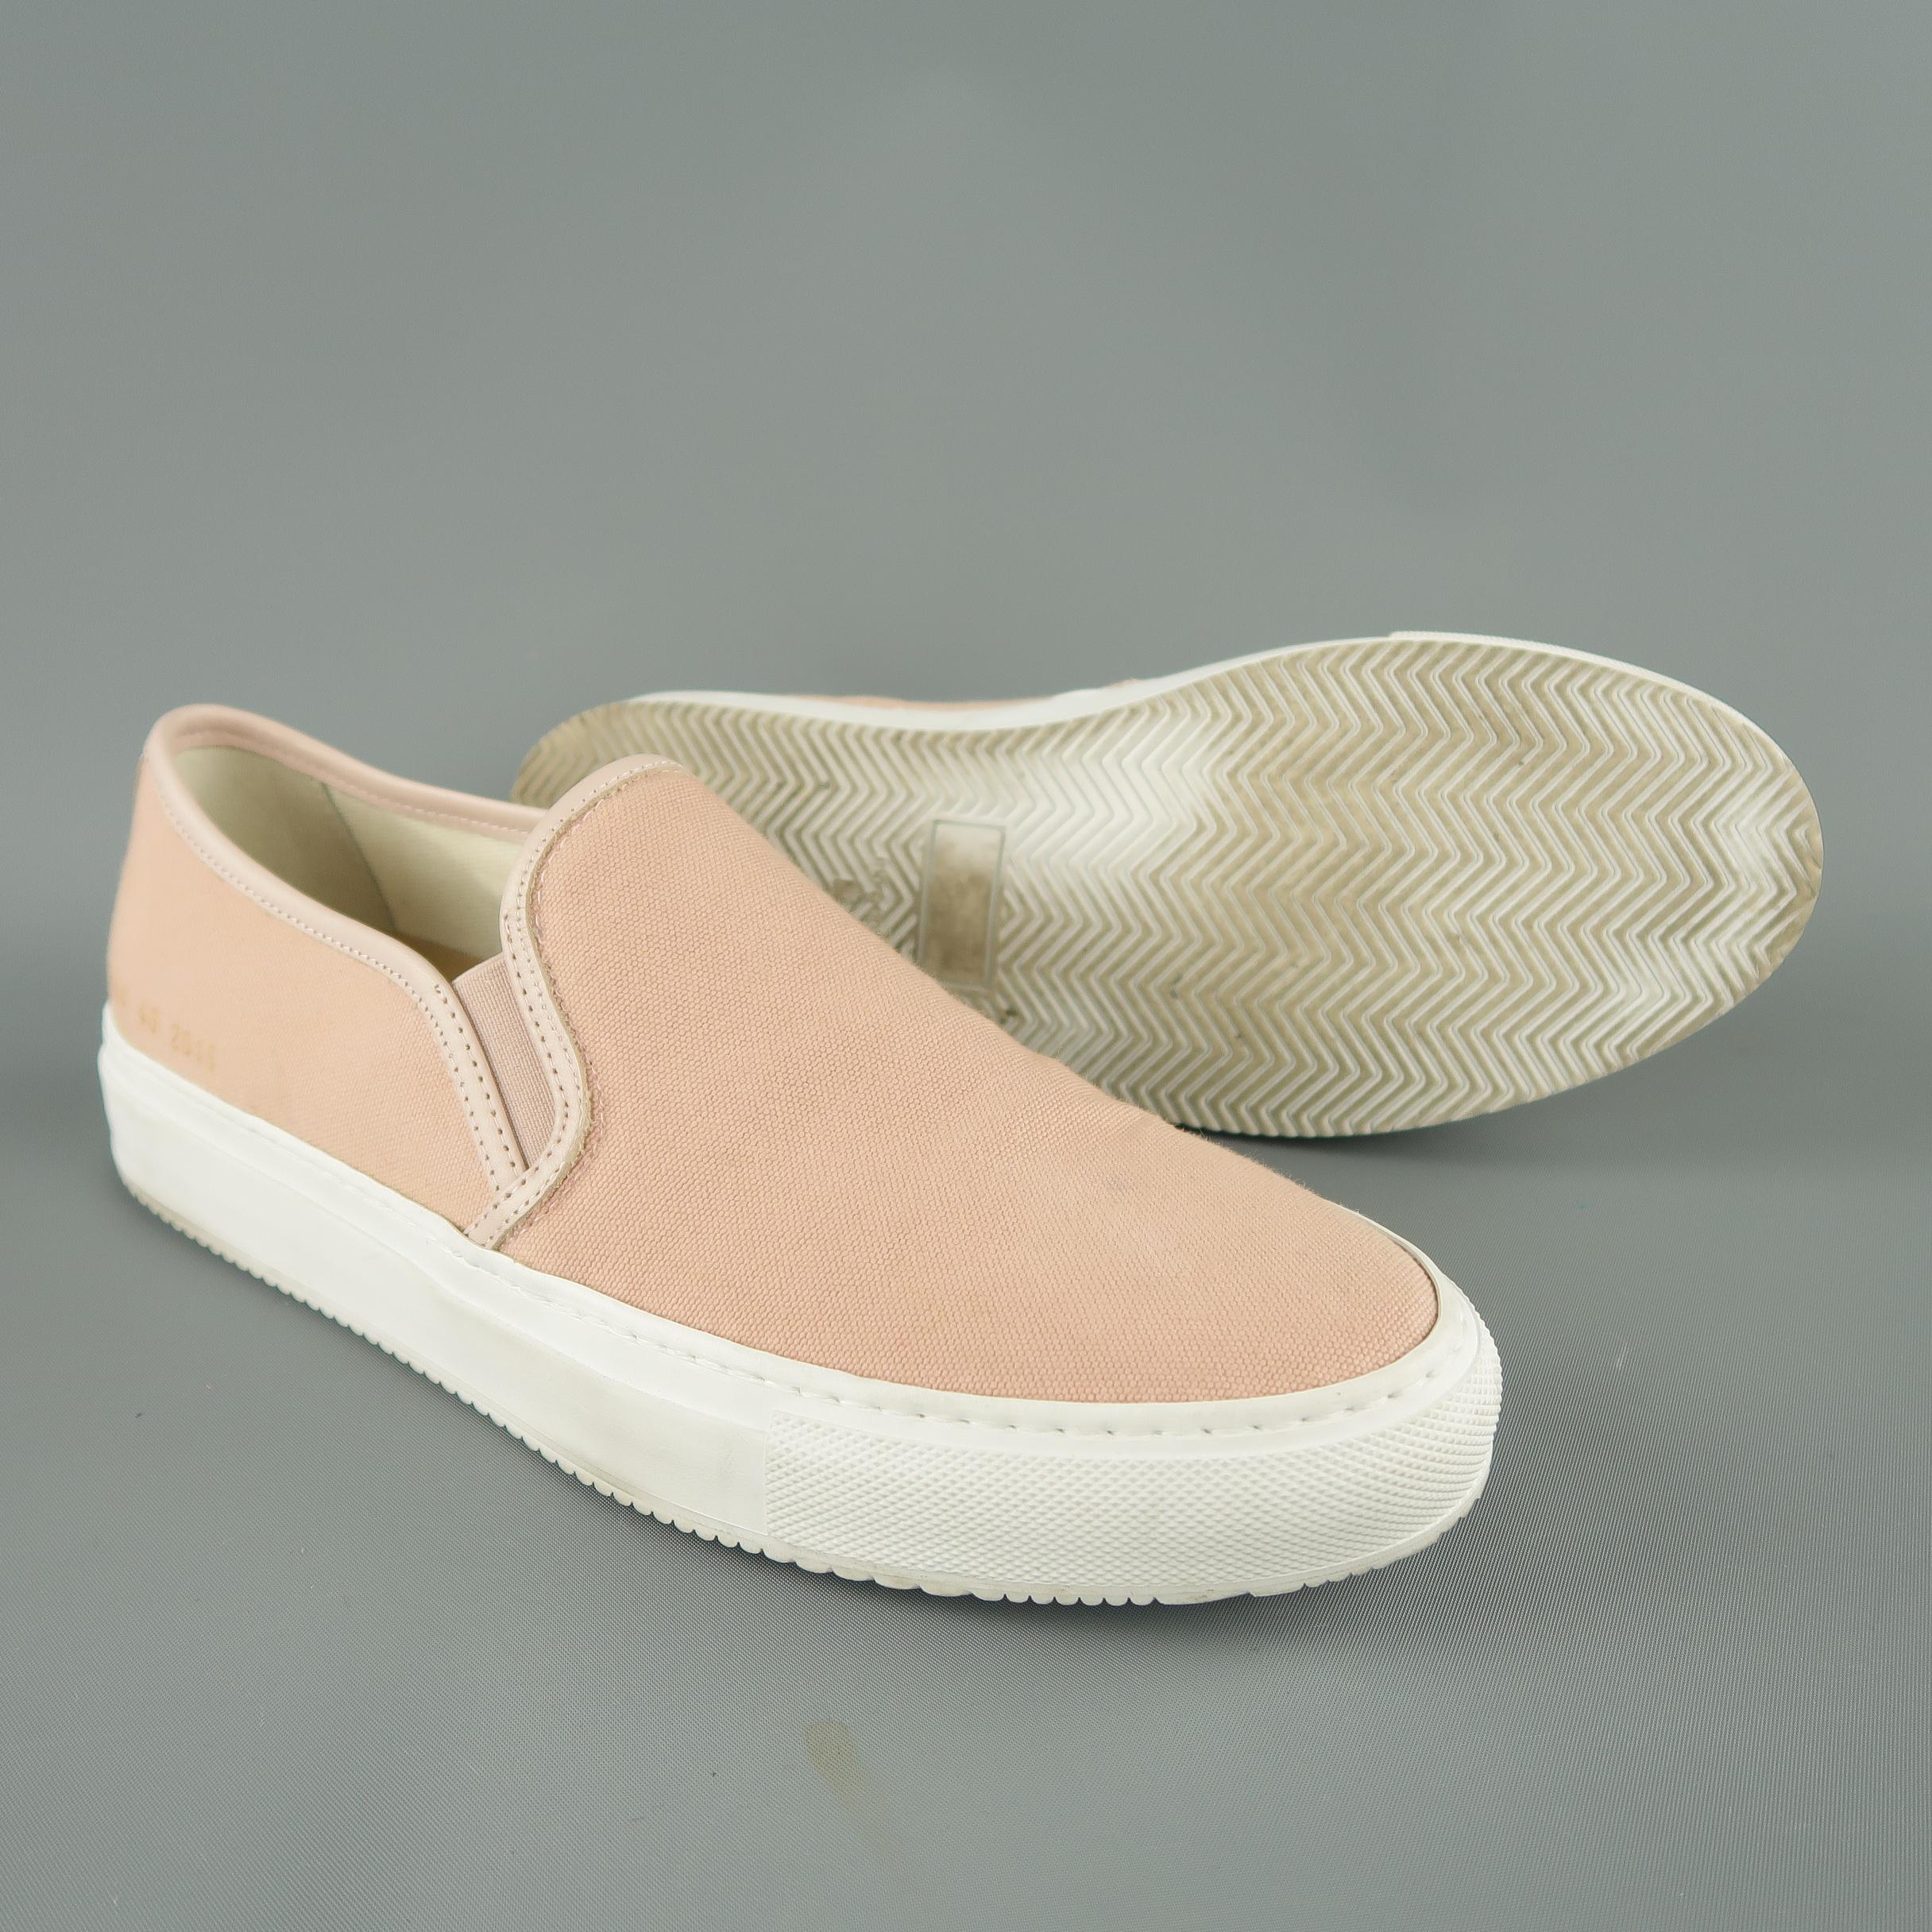 COMMON PROJECTS low top slip on sneakers come in rose pink canvas with tonal leather piping, gold flake marked heel, and white rubber sole. Minor wear.Made in Italy.
 
Good Pre-Owned Condition.
Marked: IT 40